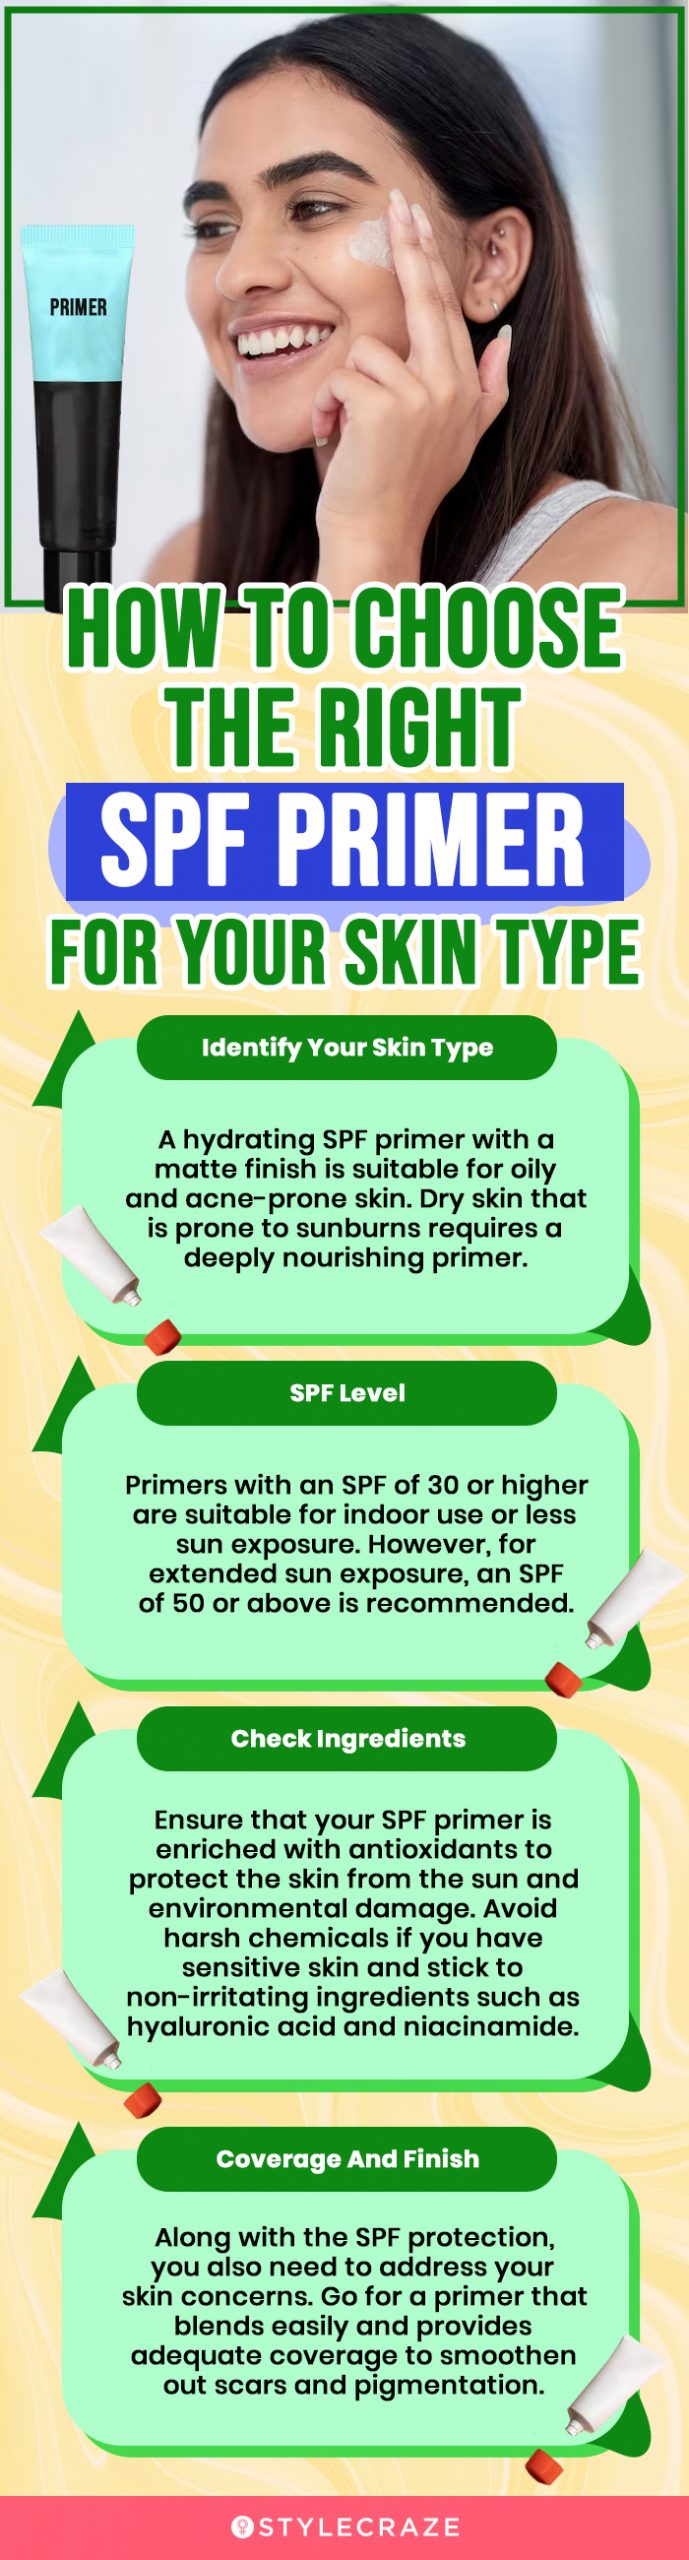 How To Choose The Right SPF Primer(infographic)